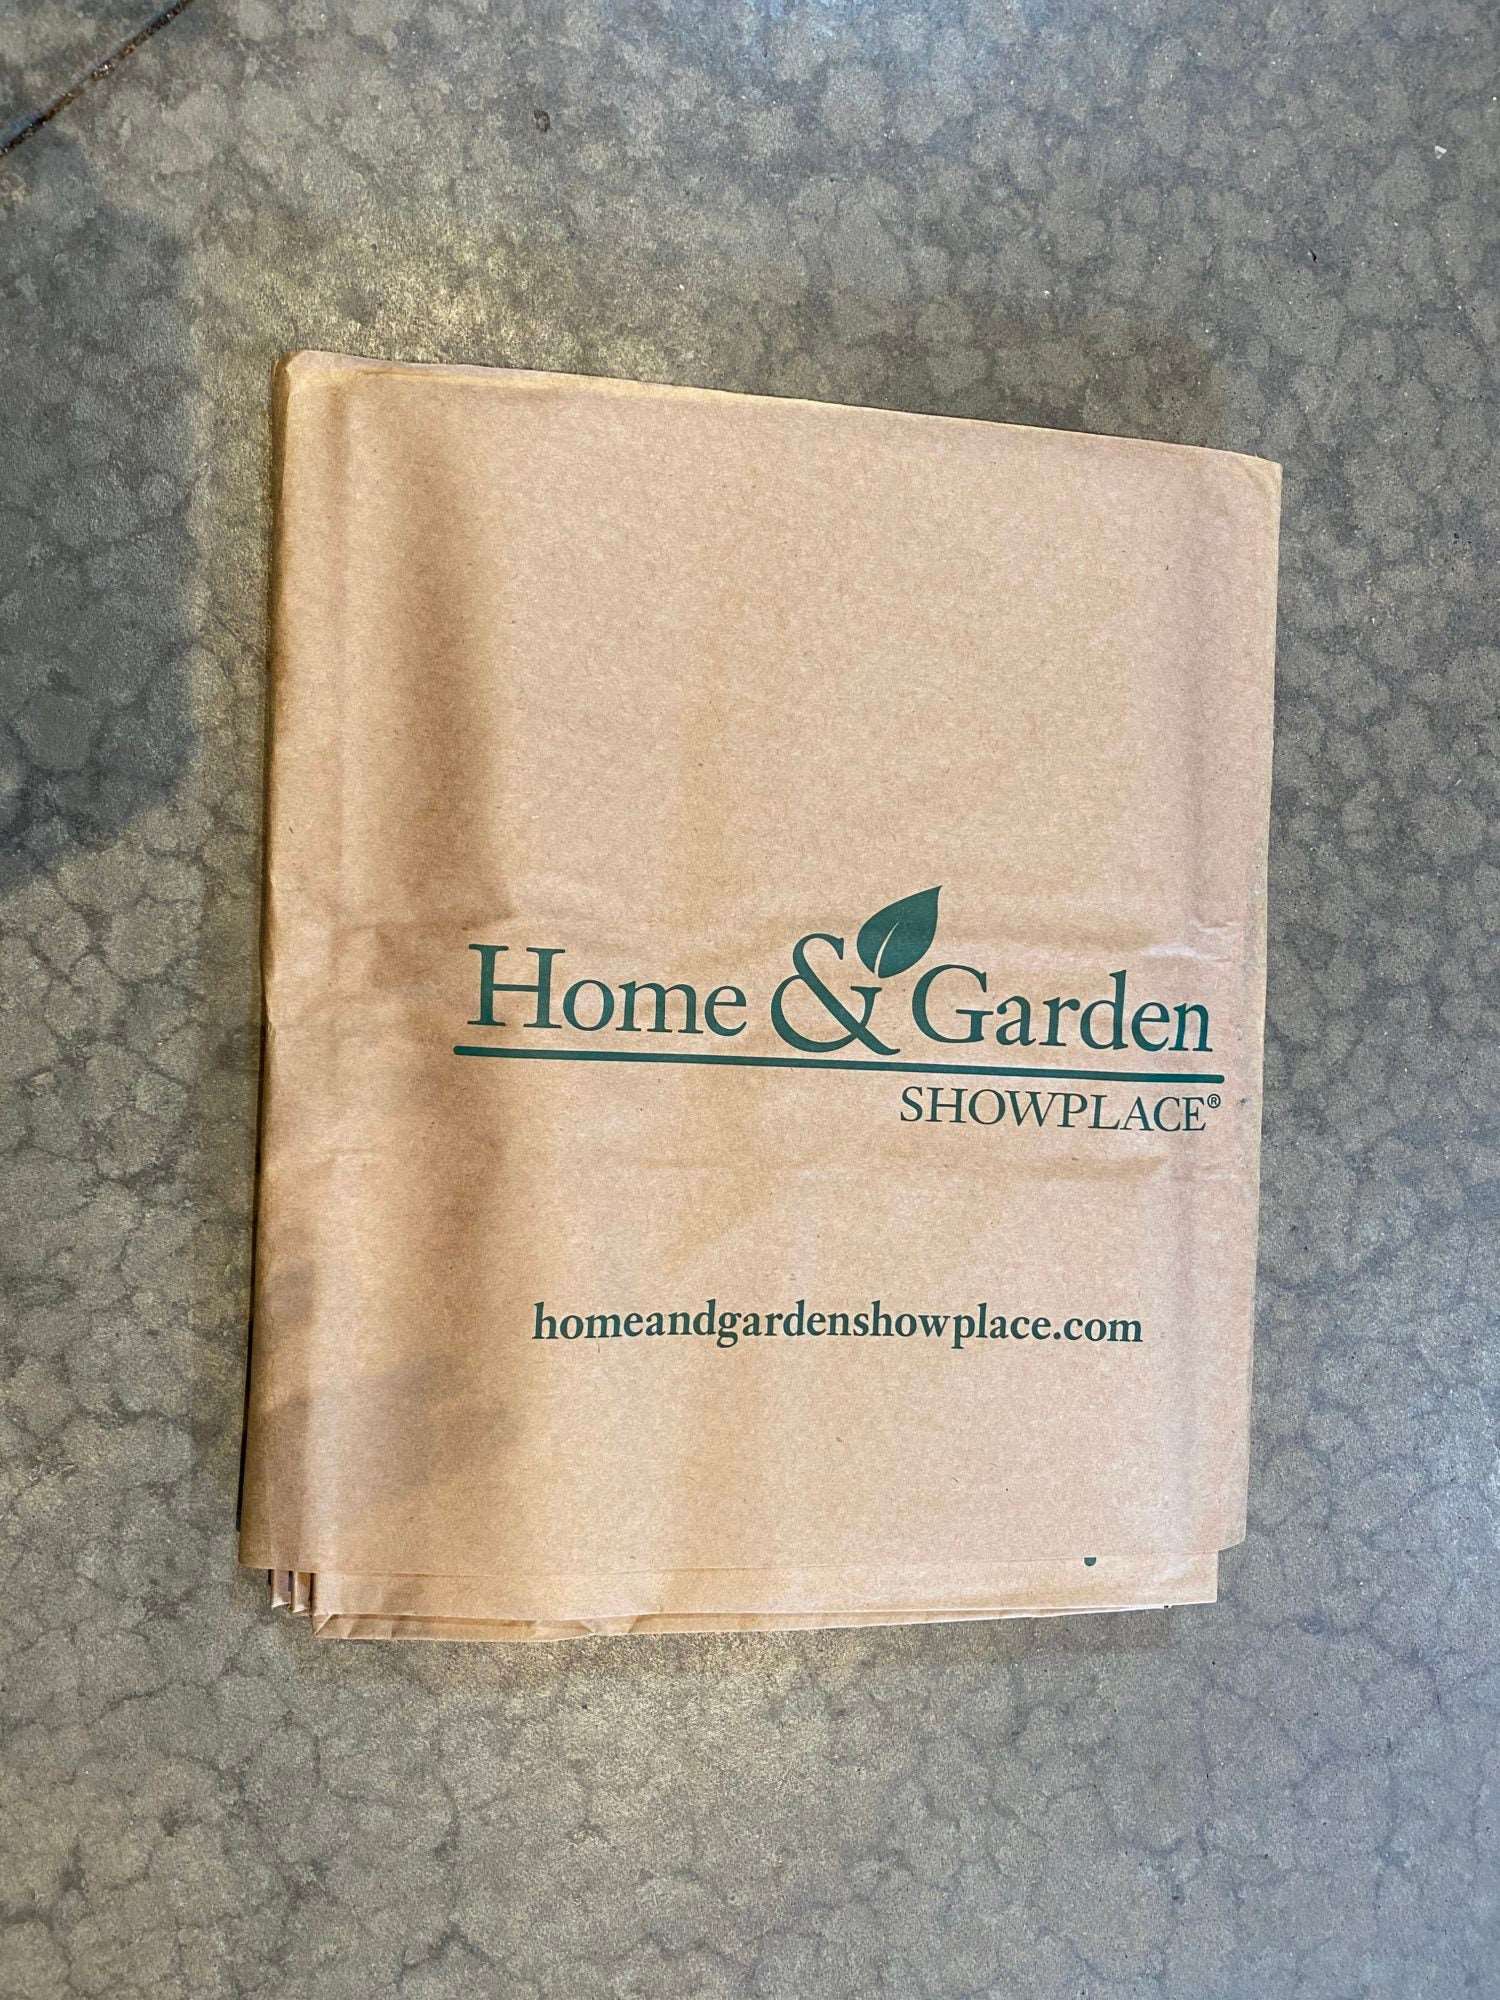 Yard Waste Bags (5 Pack) wallacegardencenter